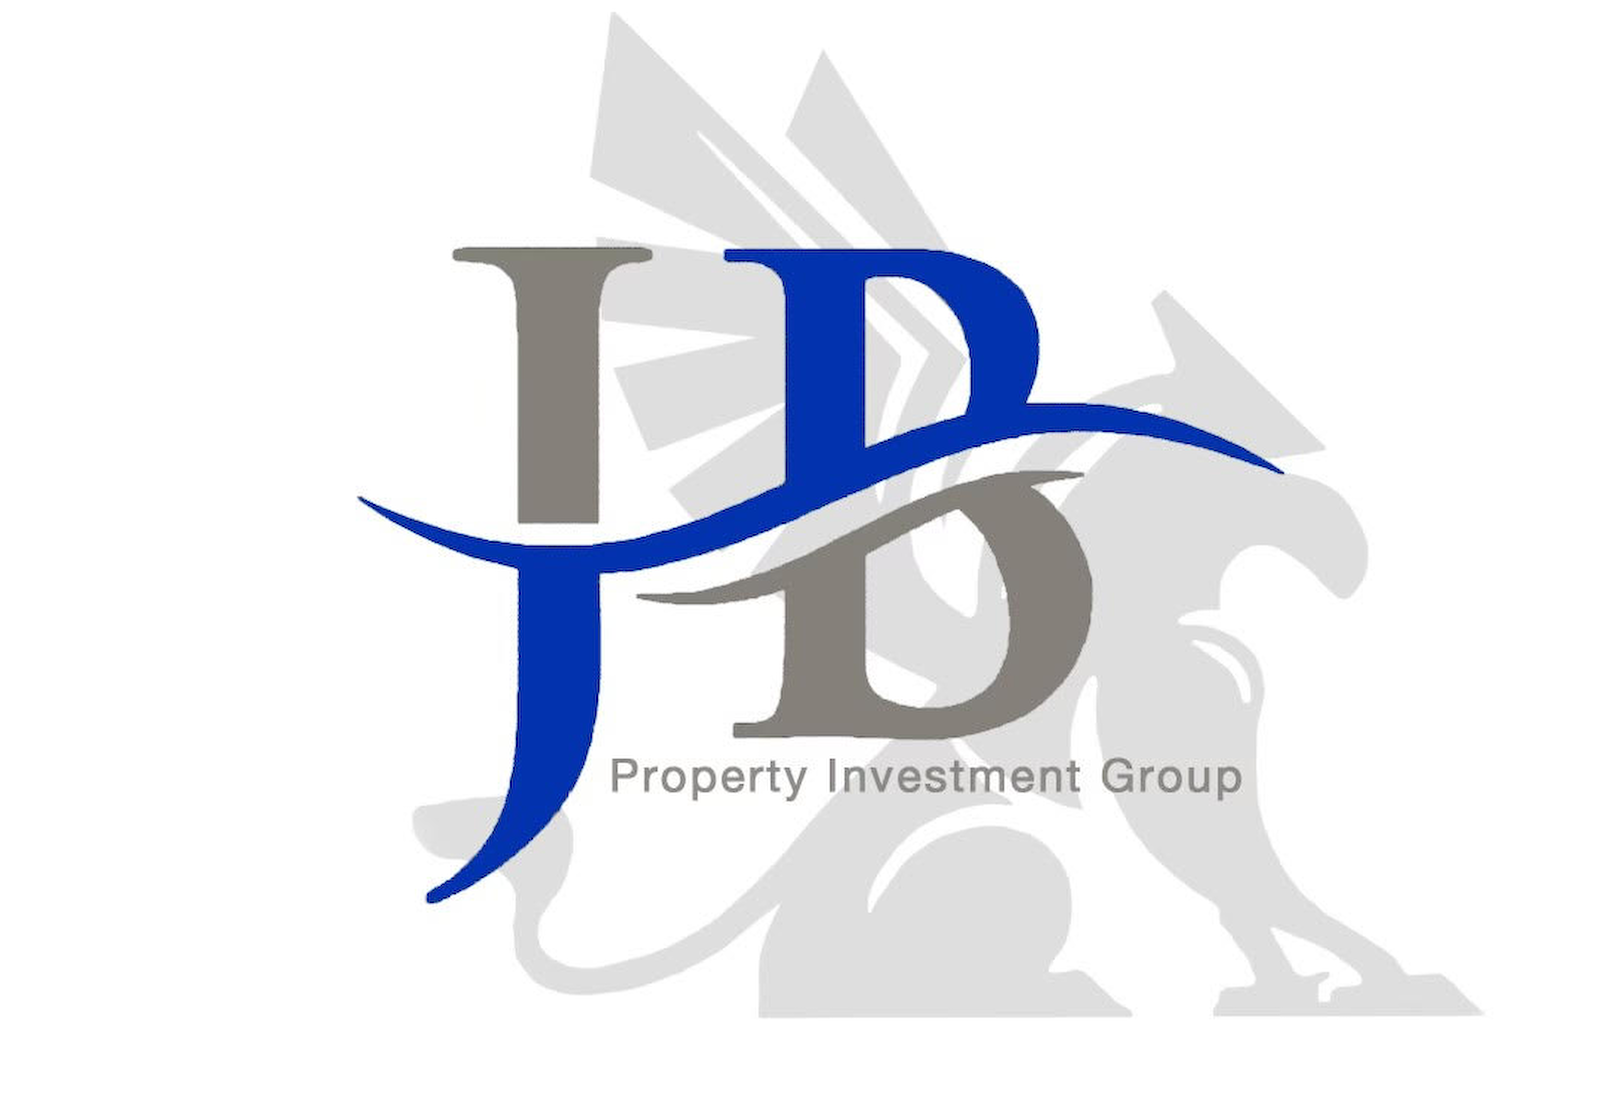 JB Property Investment Group